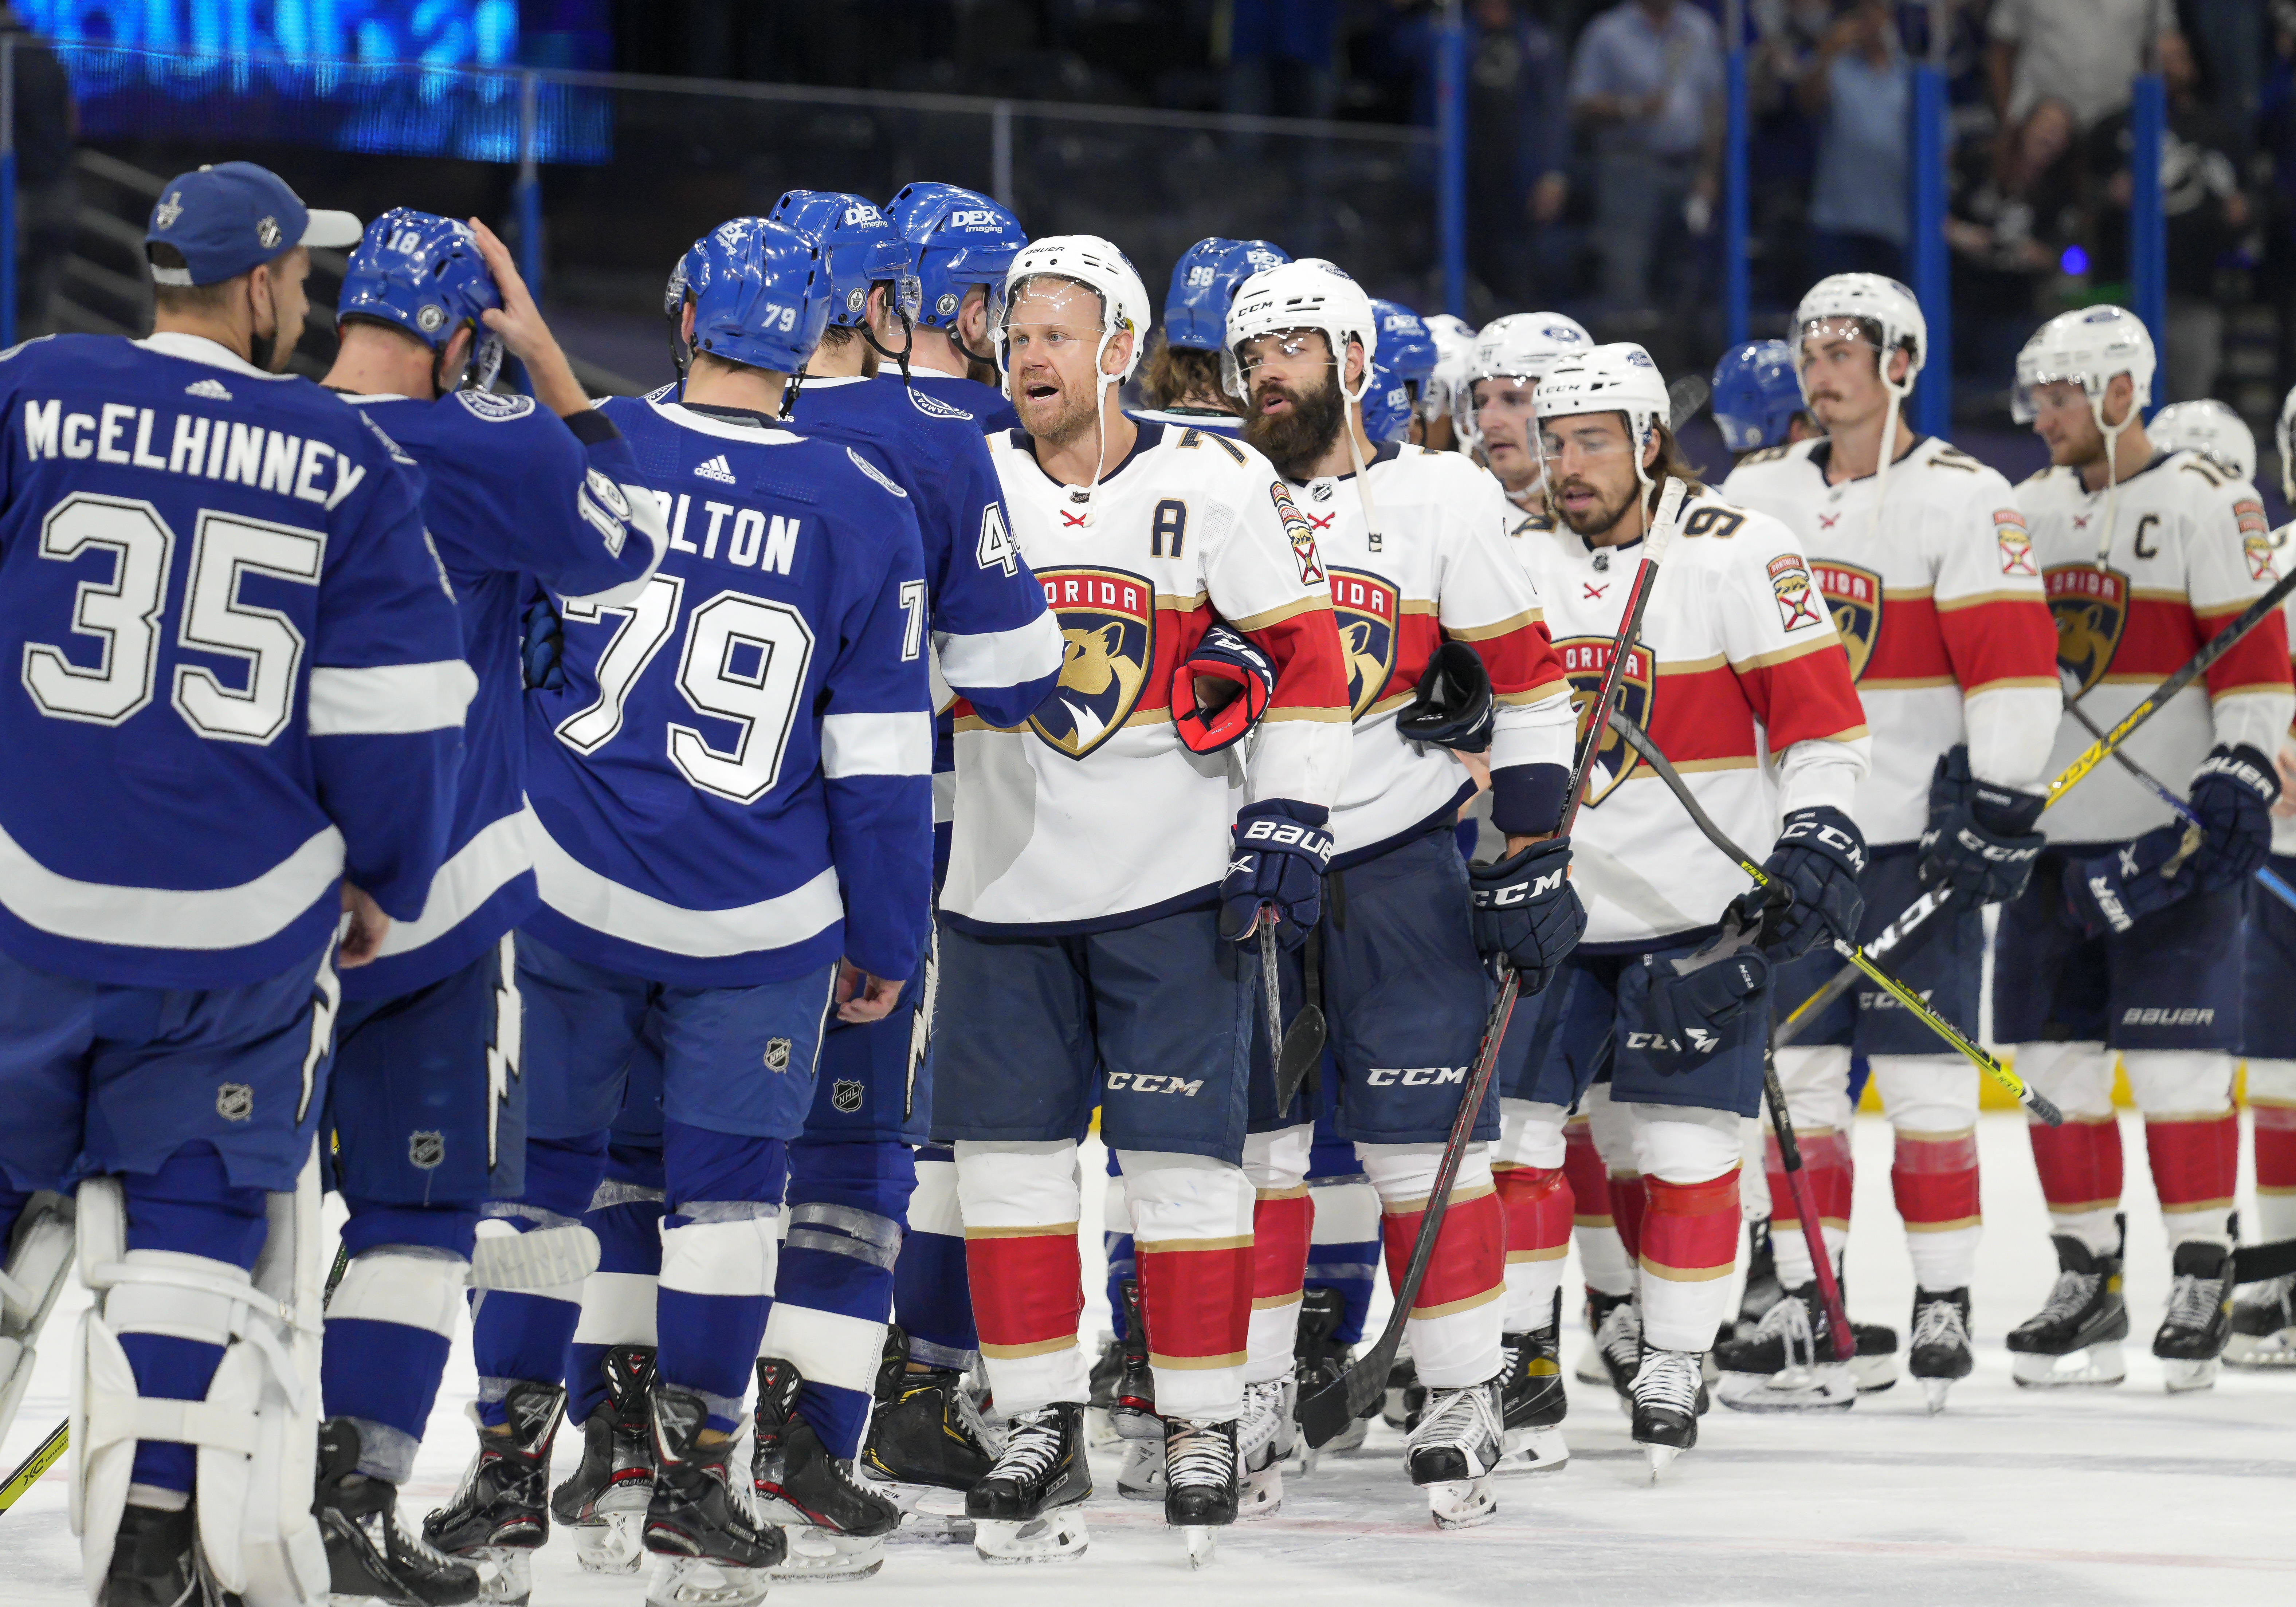 Tampa Bay Lightning and Florida Panthers shake hands at the end of the series during the NHL Stanley Cup playoff match Game 6 on May 26, 2021 at Amalie Arena in Tampa, FL.